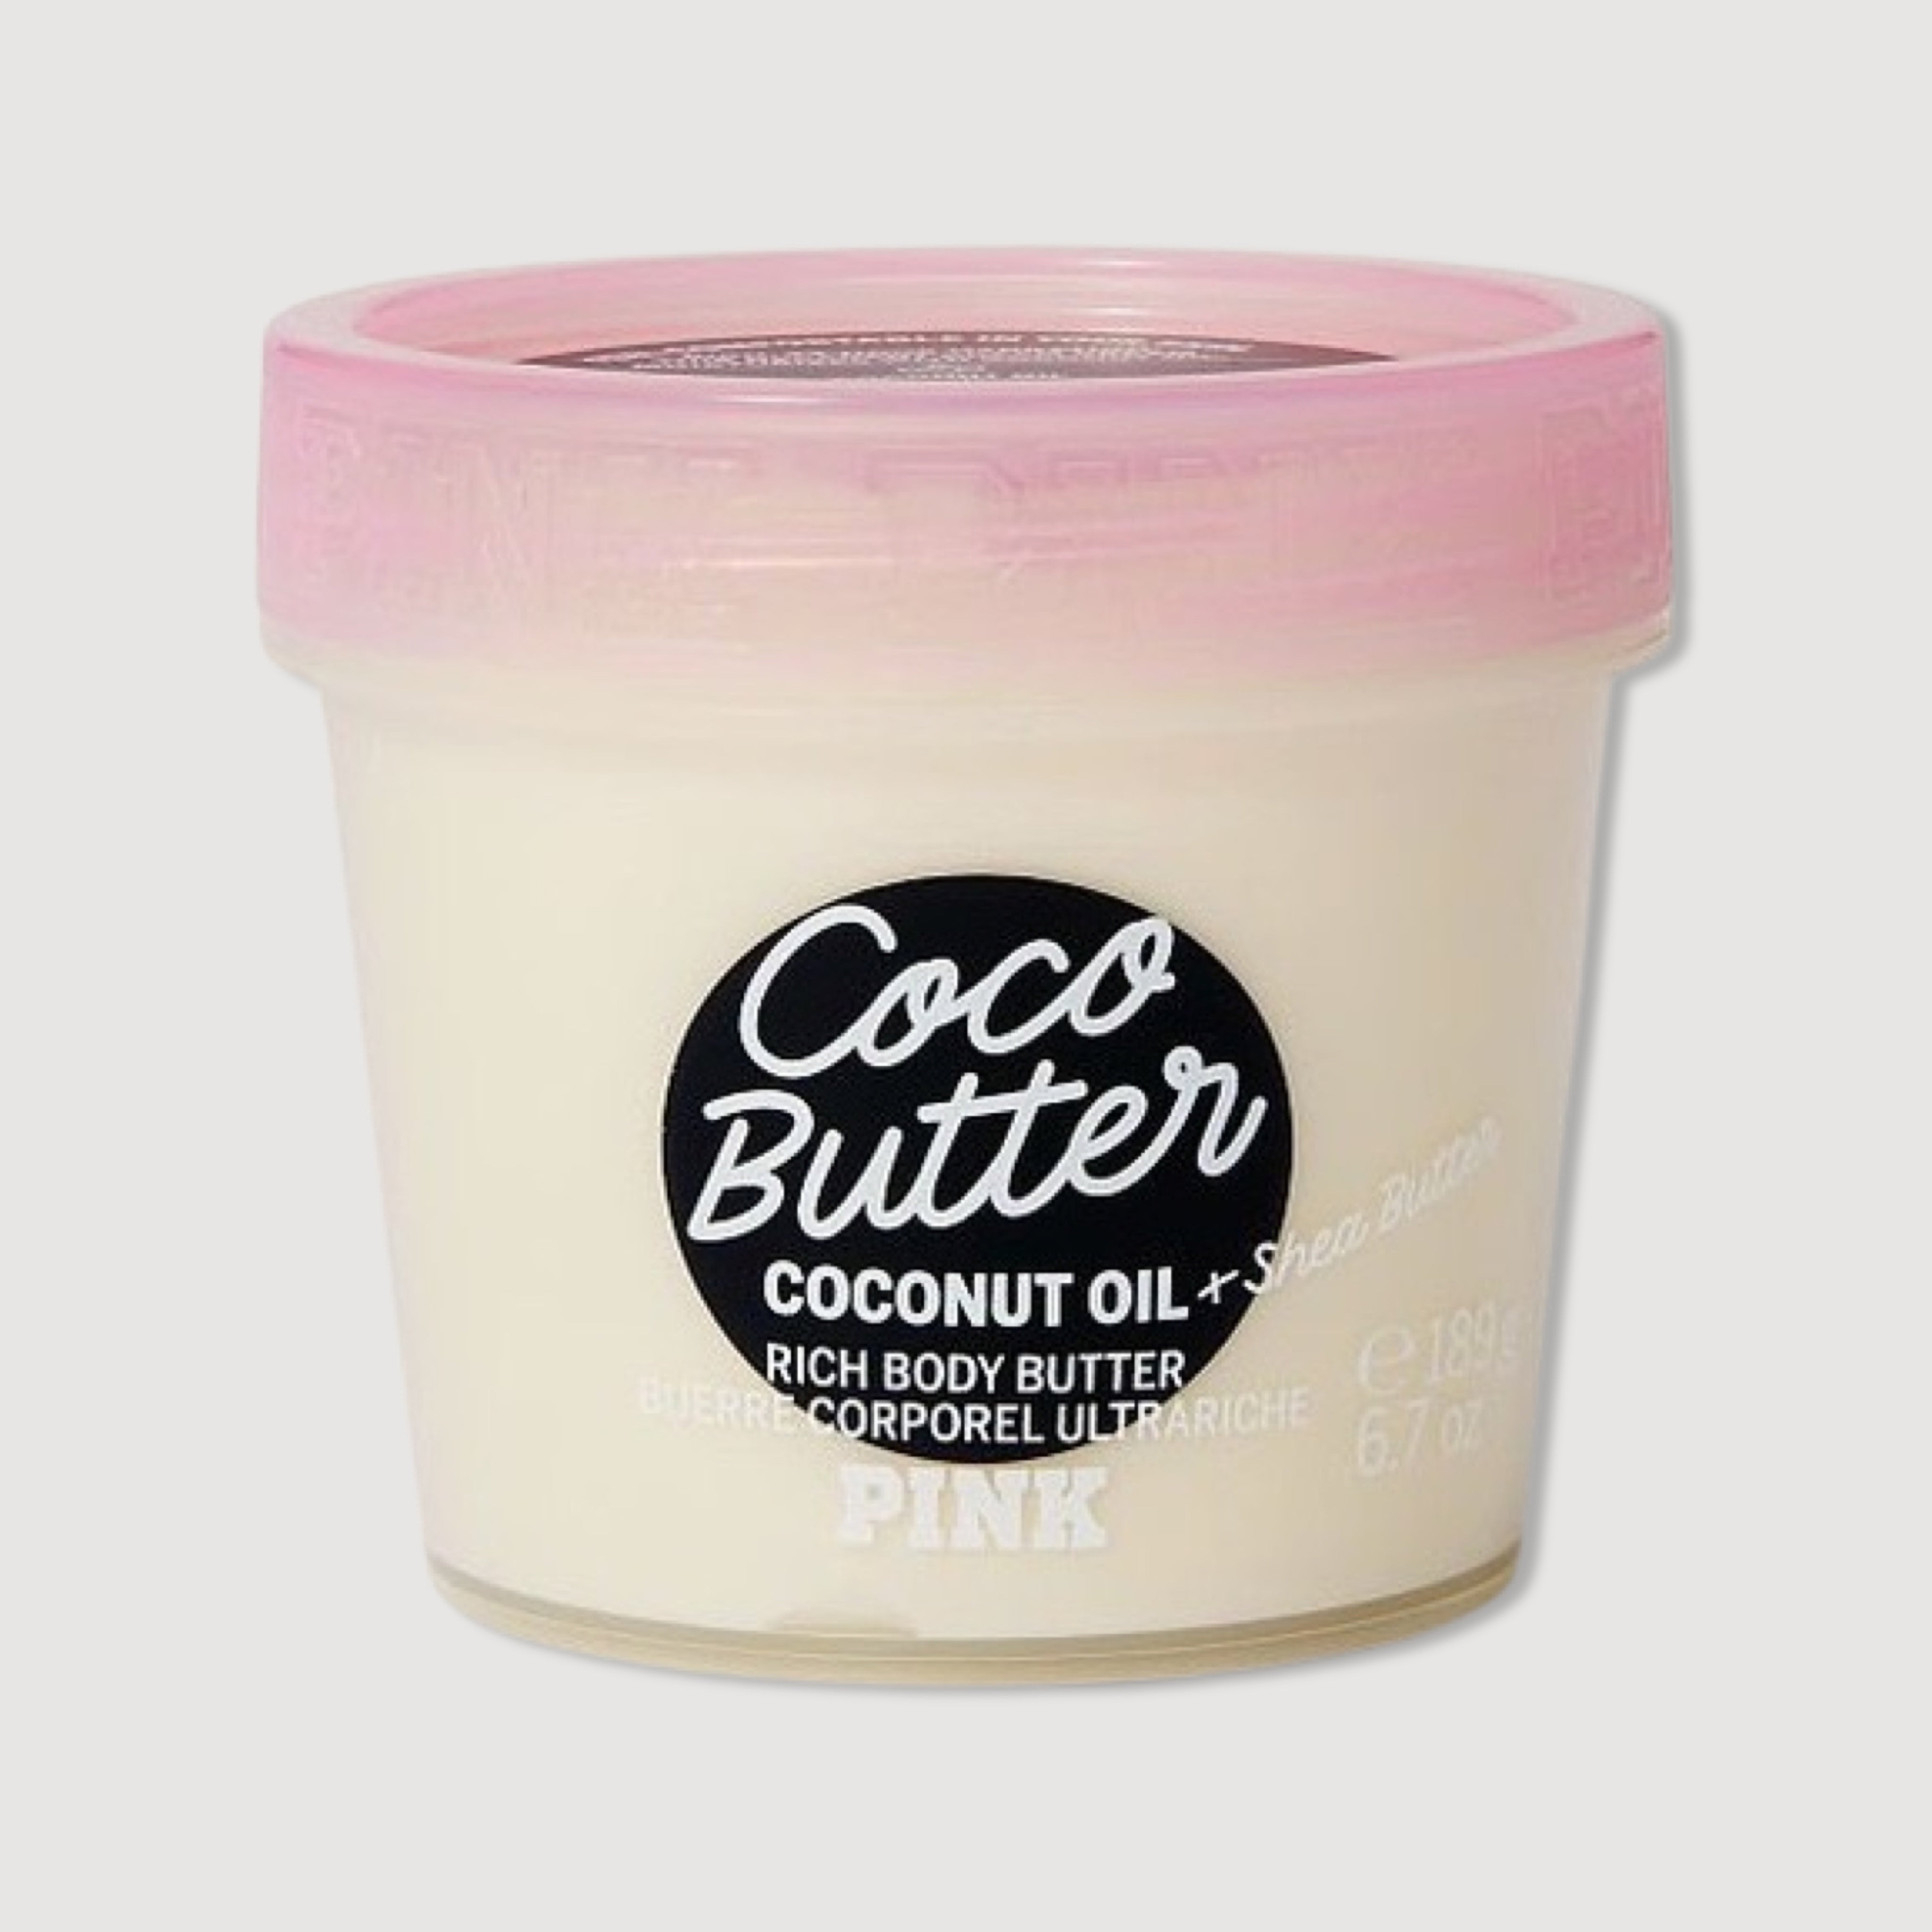 COCO BUTTER body cream with Coconut oil + Shea Butter